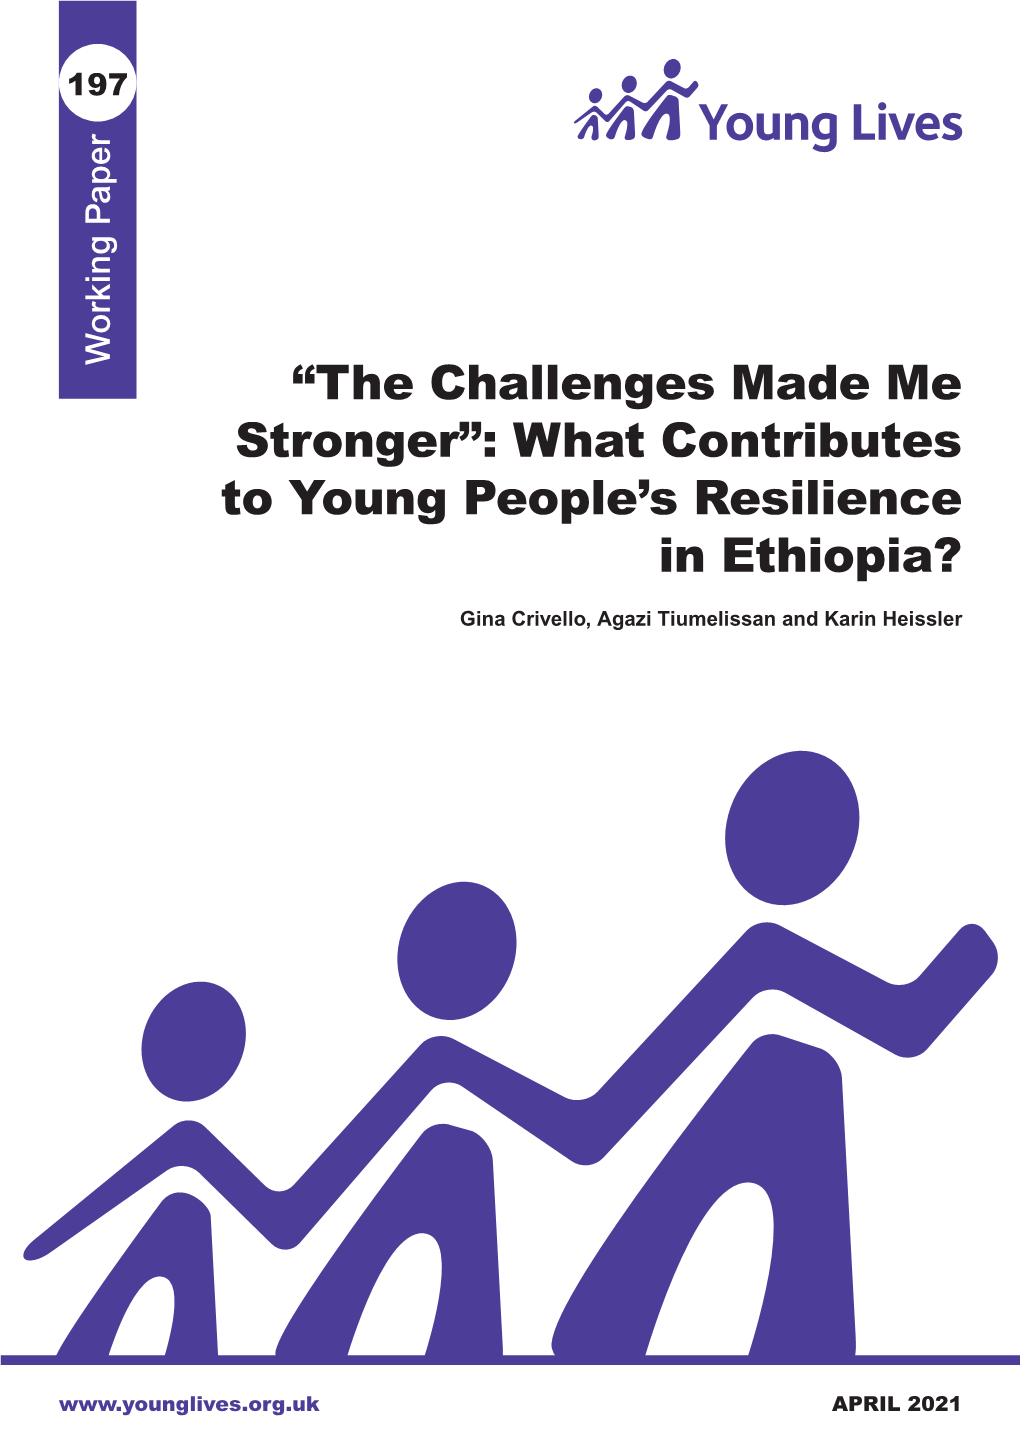 “The Challenges Made Me Stronger”: What Contributes to Young People’S Resilience in Ethiopia?